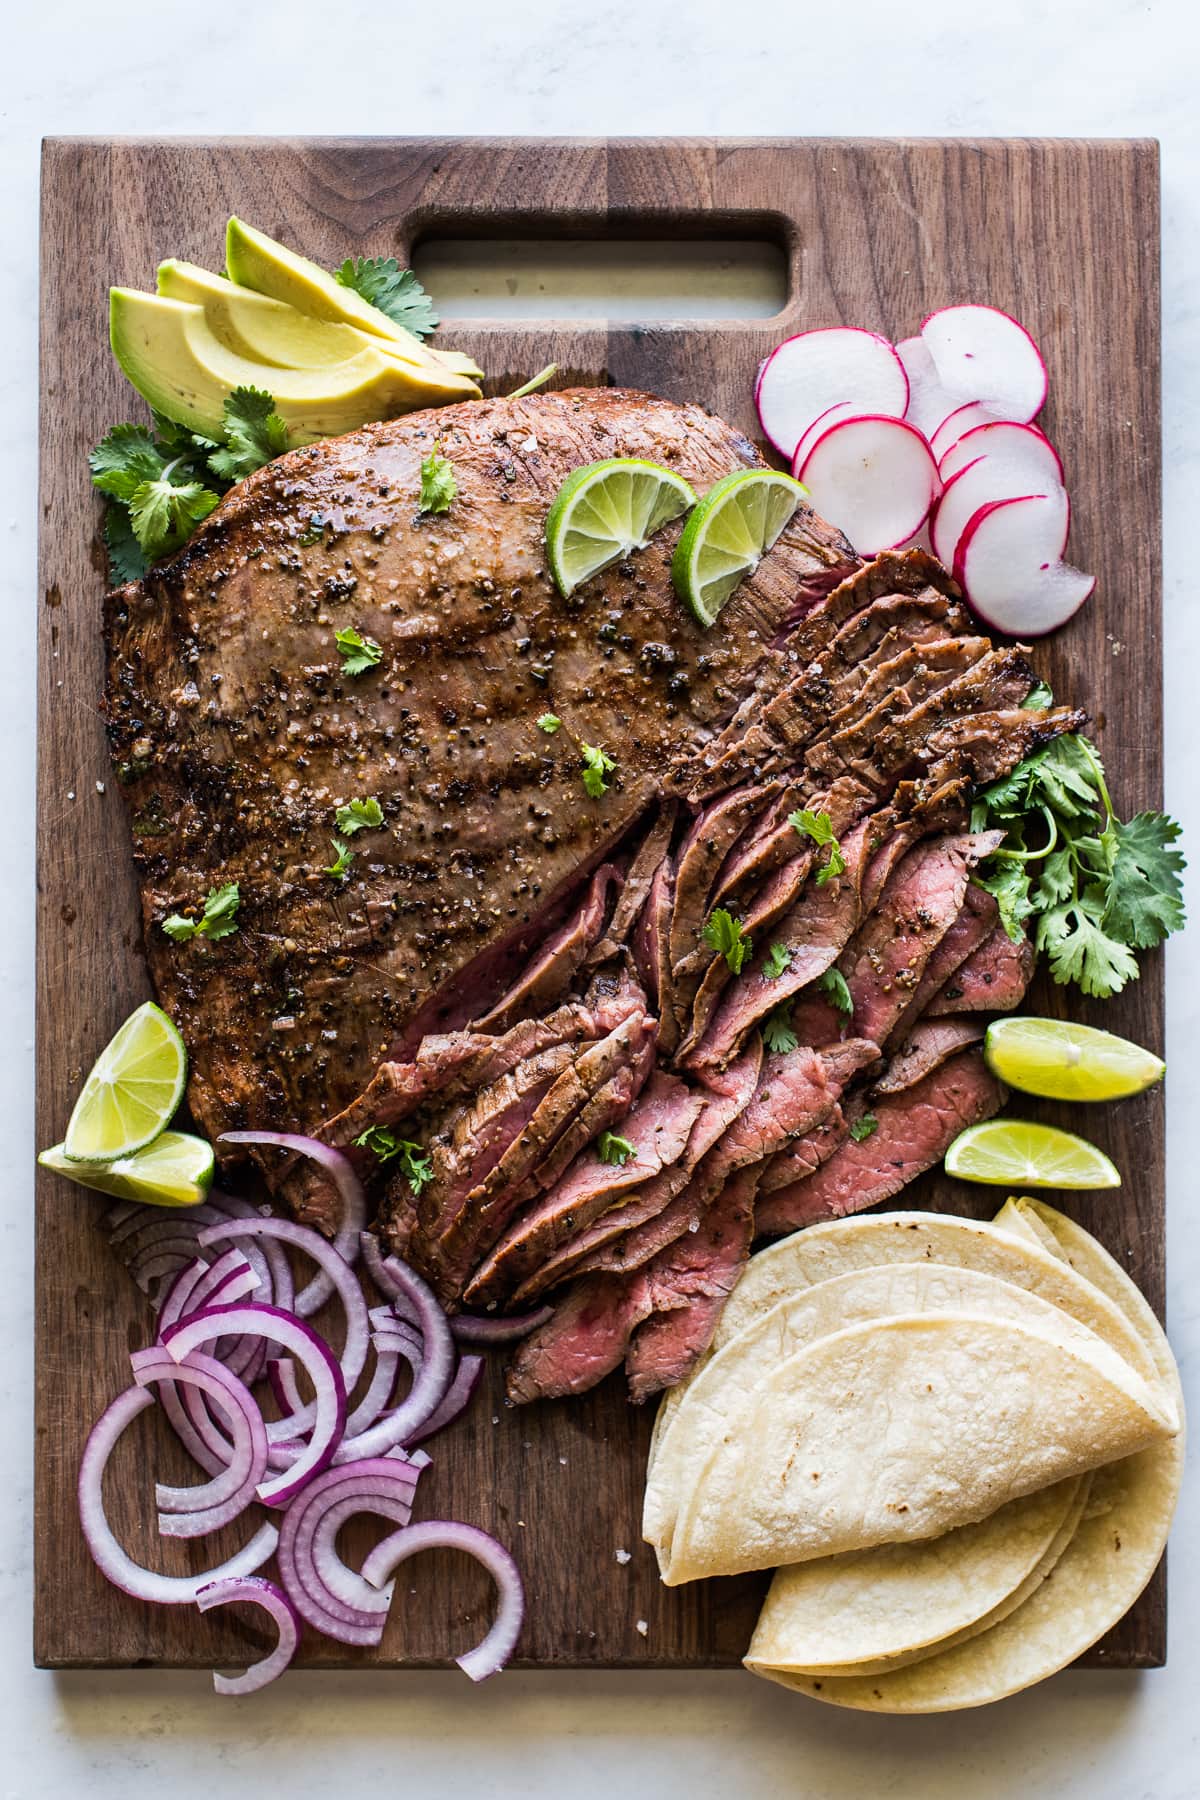 Thinly sliced carne asada on a cutting board with cilantro, corn tortillas, limes, avocados, and radishes.